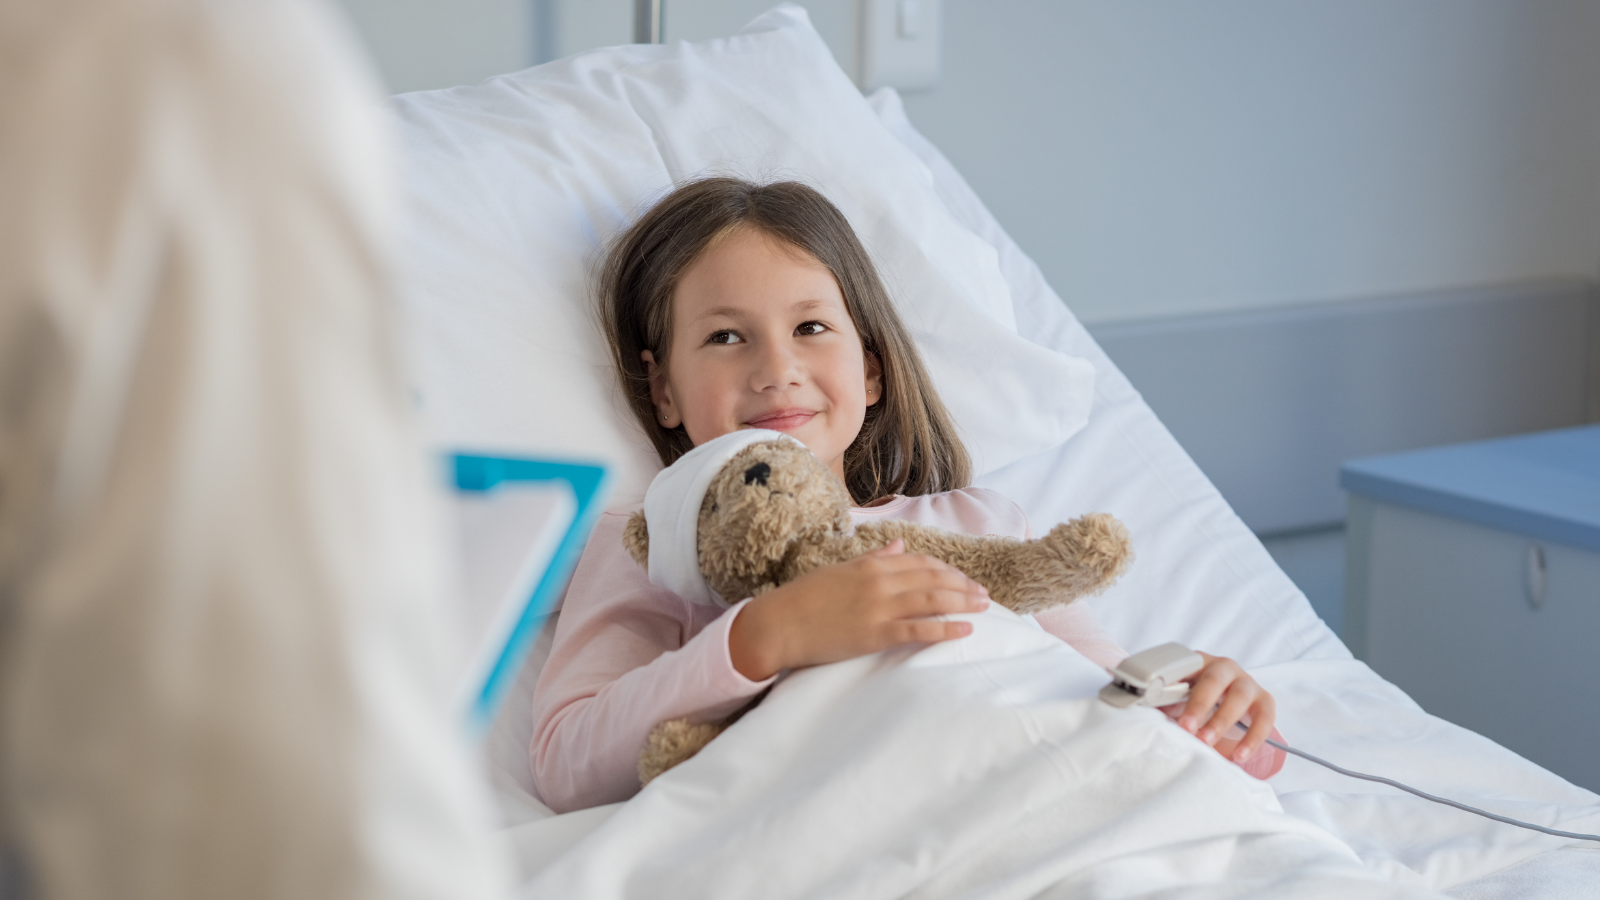 Child in hospital bed holding a teddy bear